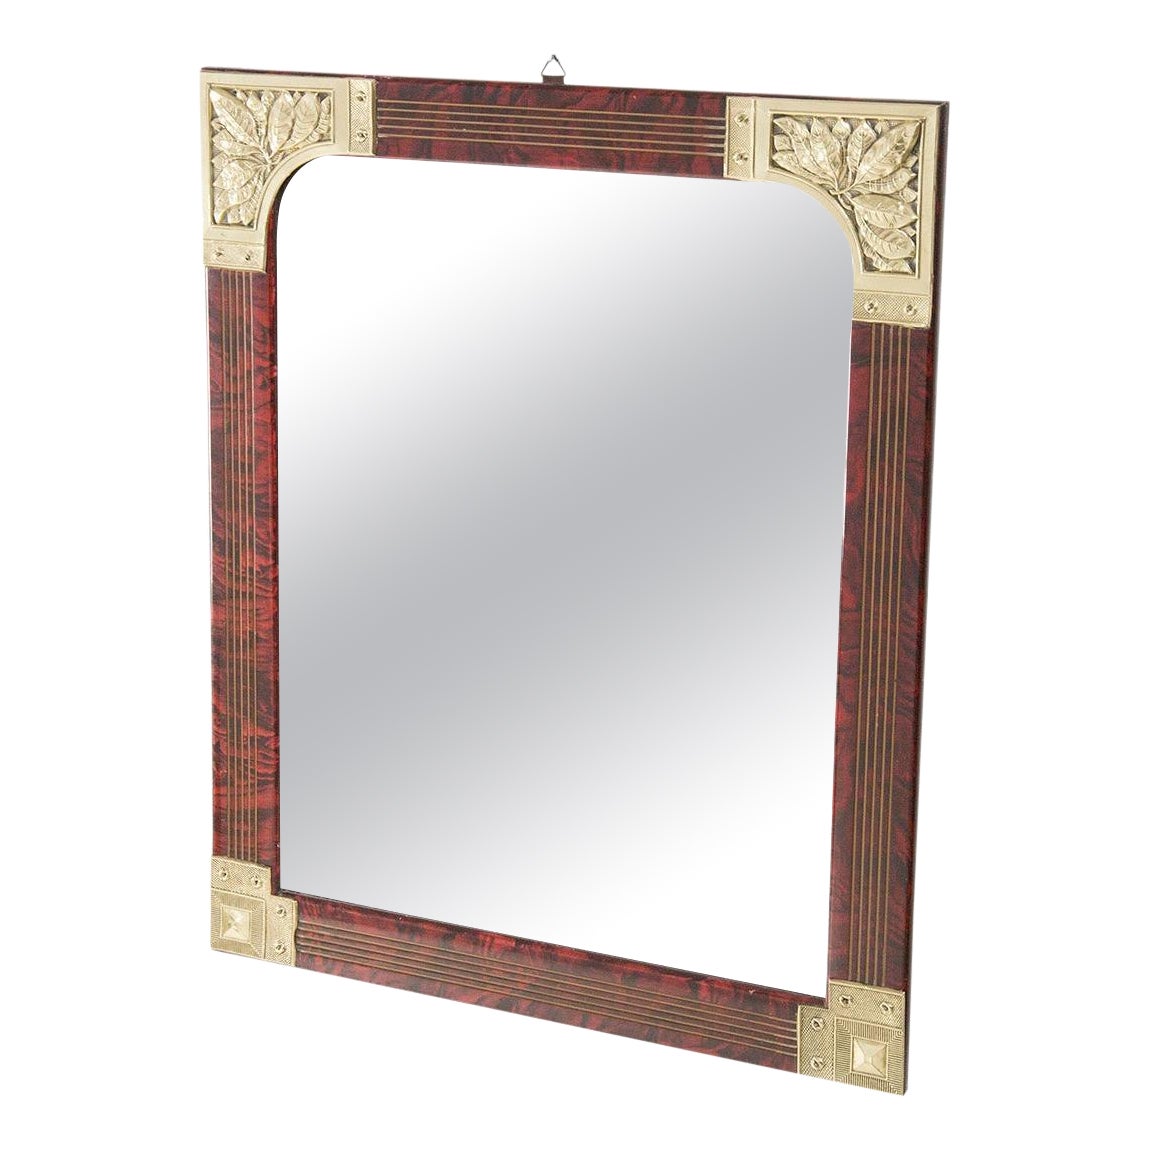 Antique Wall Mirror in Red Wood and Decorative Plaques For Sale